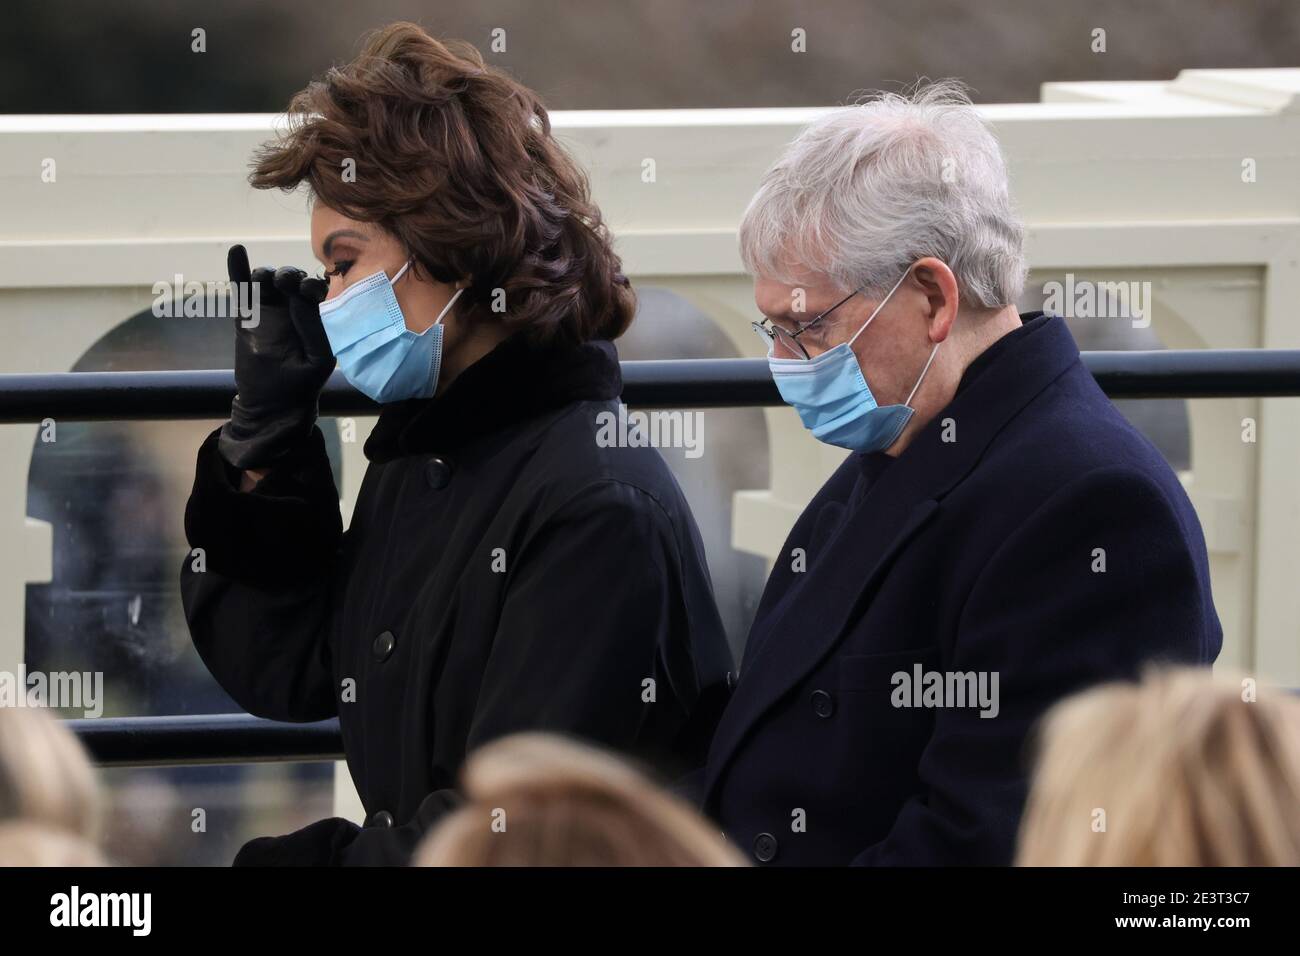 Washington, DC. 20th Jan, 2021.Washington DC, USA. 20th Jan 2021.Senator Mitch McConnell (R-KY) and his wife Elaine Chao attend the inauguration of Joe Biden as the 46th President of the United States on the West Front of the U.S. Capitol in Washington, U.S., January 20, 2021. REUTERS/Jonathan Ernst/Pool | usage worldwide Credit: dpa picture alliance/Alamy Live News Credit: dpa picture alliance/Alamy Live News Stock Photo